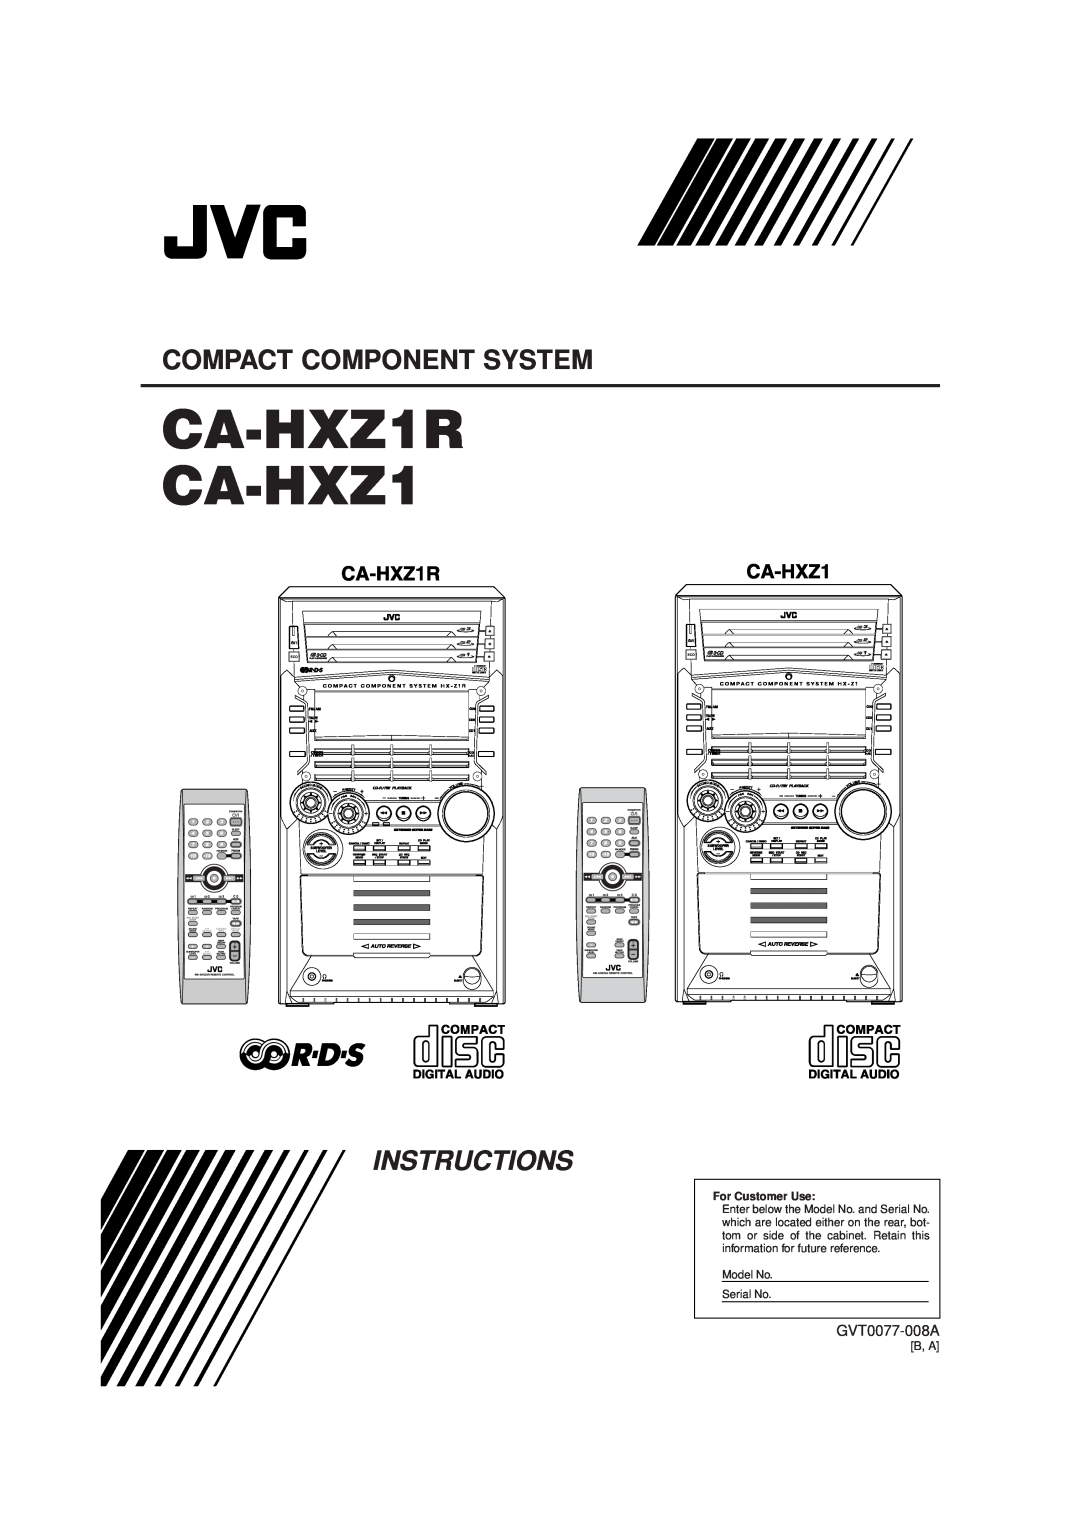 JVC GVT0077-008A manual CA-HXZ1R CA-HXZ1, Compact Component System, Instructions, For Customer Use, Nd M, Olume, Preset 